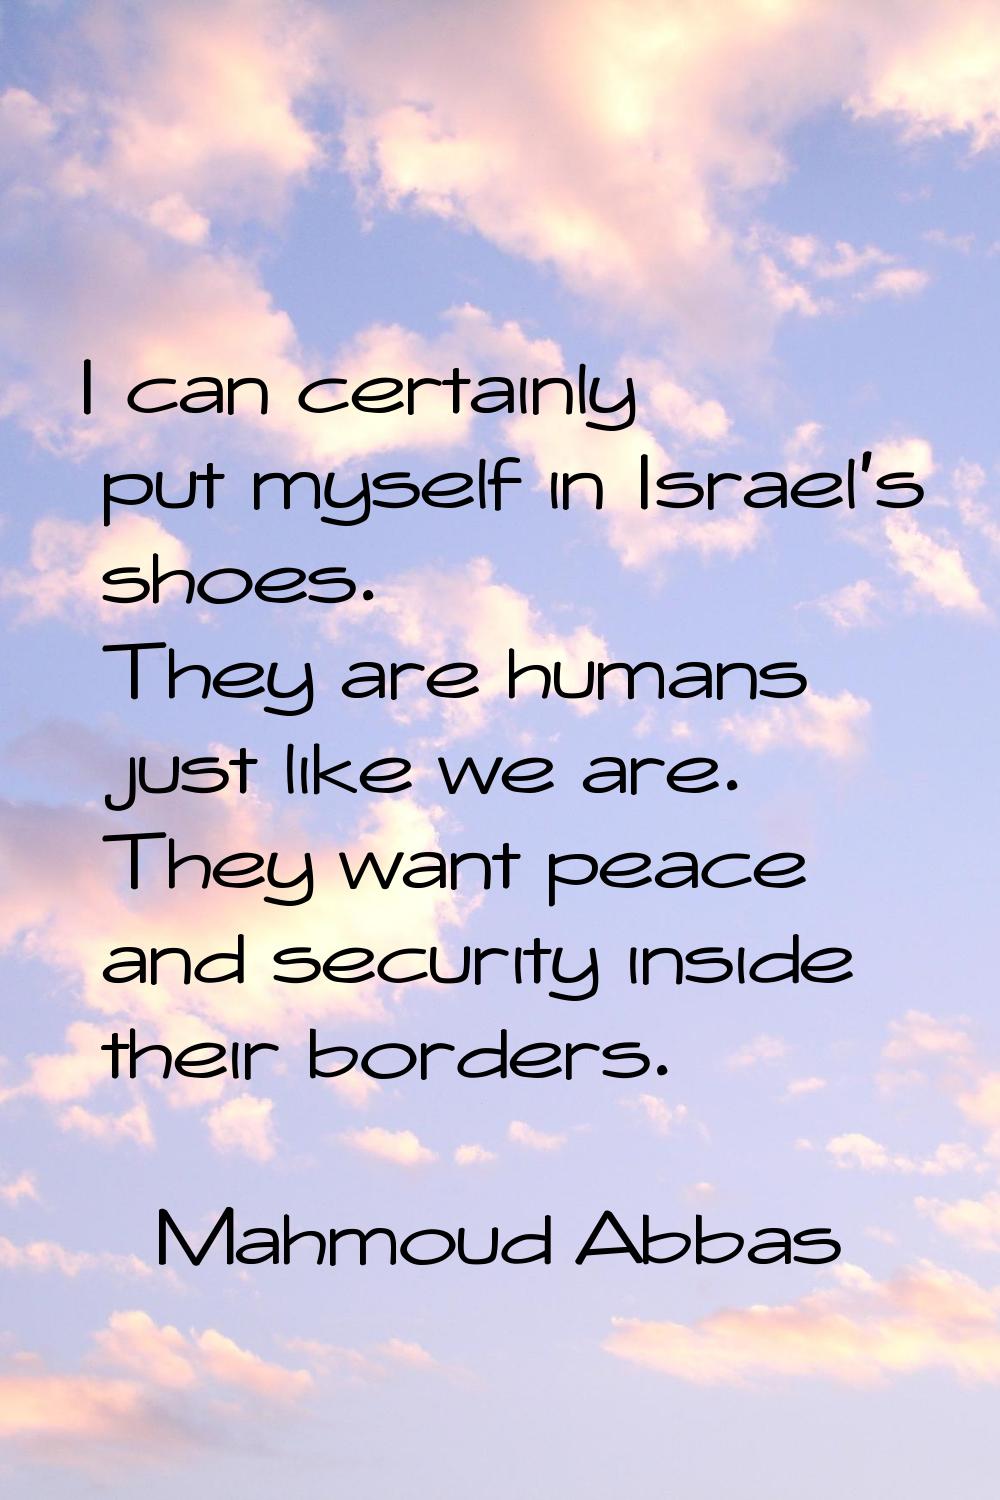 I can certainly put myself in Israel's shoes. They are humans just like we are. They want peace and